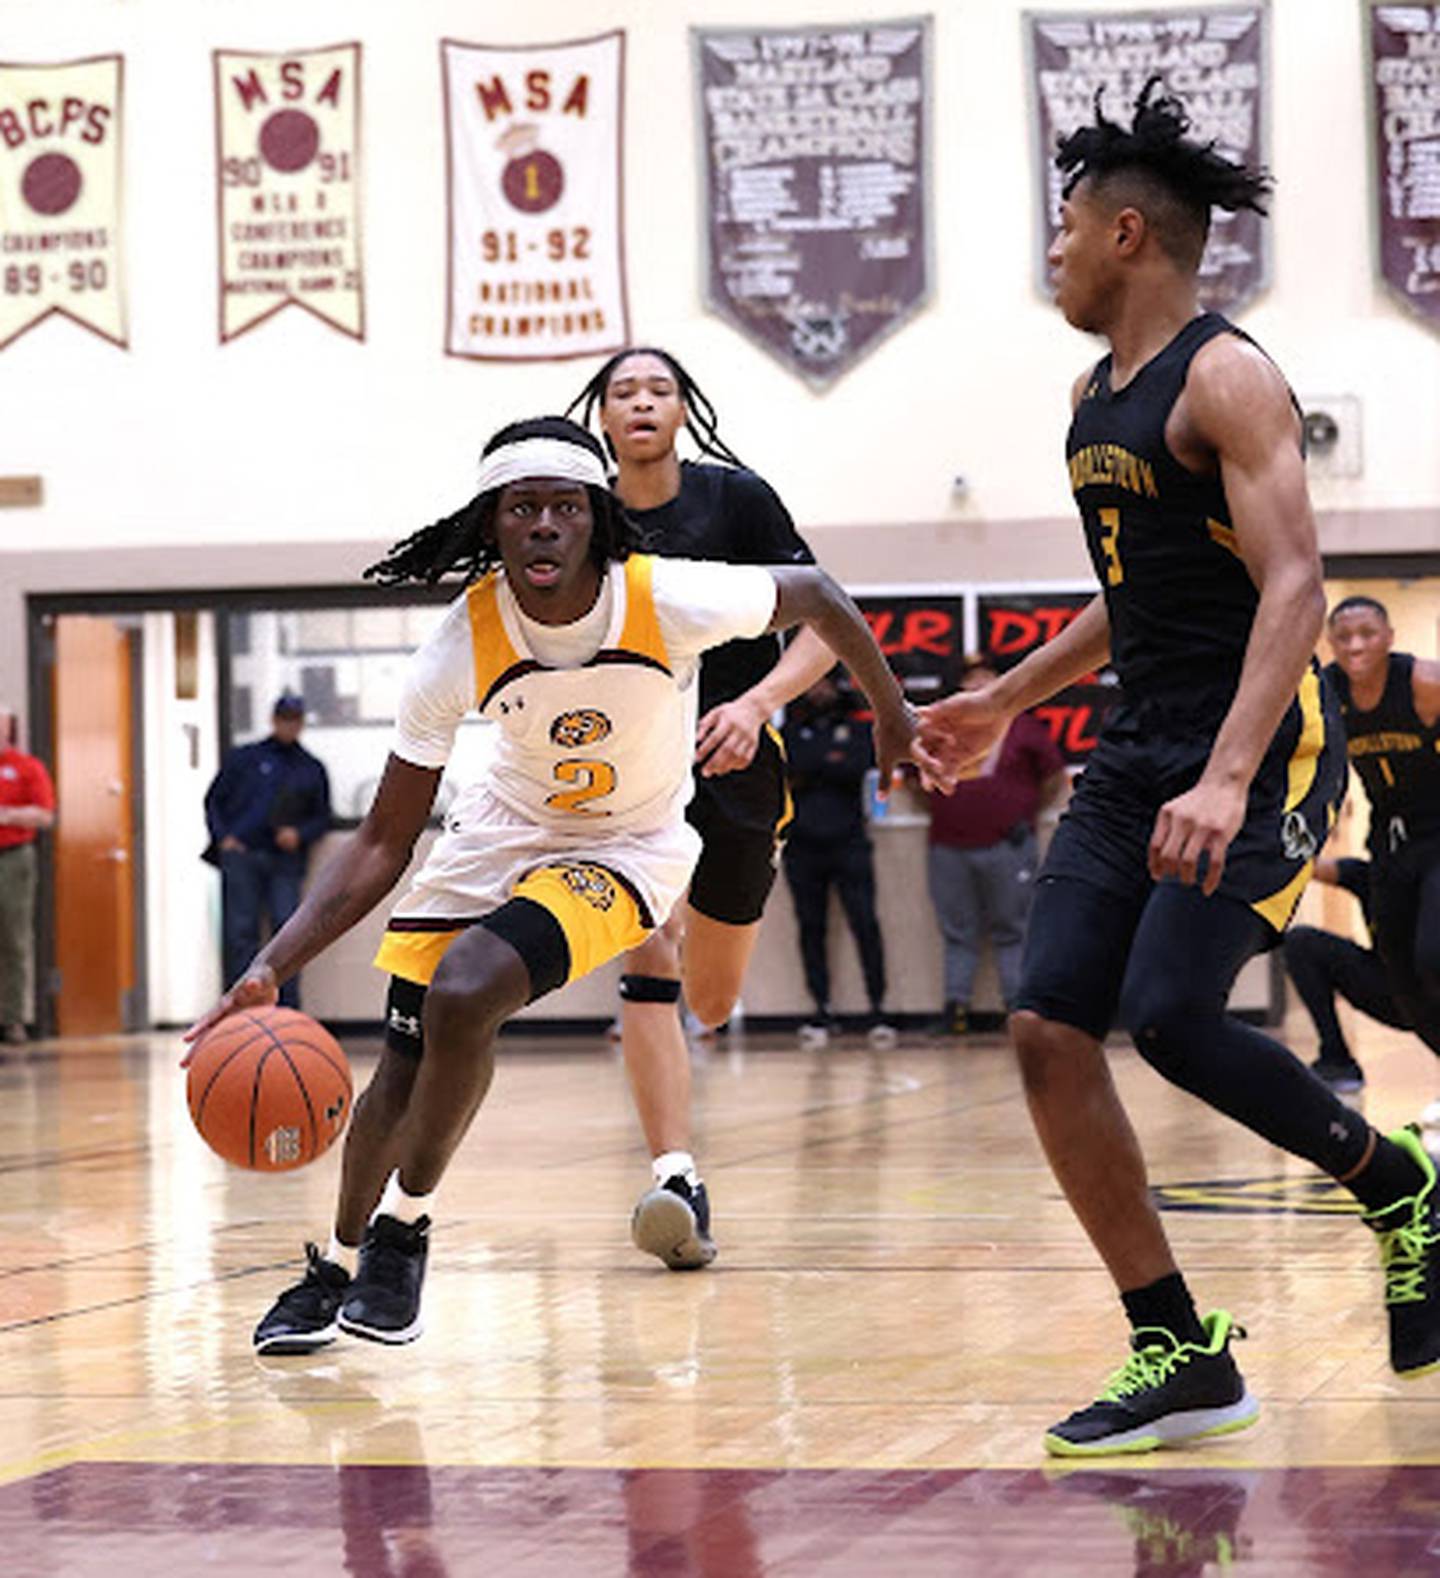 Dunbar's Otis Toney drives down the lane during Friday's boys basketball match against Randallstown. Toney finished with 21 points and seven rebounds for game's Most Valuable Player honors as the Poets improved to 12-2 with a 67-49 victory over the Rams in the opening game of the 25th Basketball Academy at Dunbar.